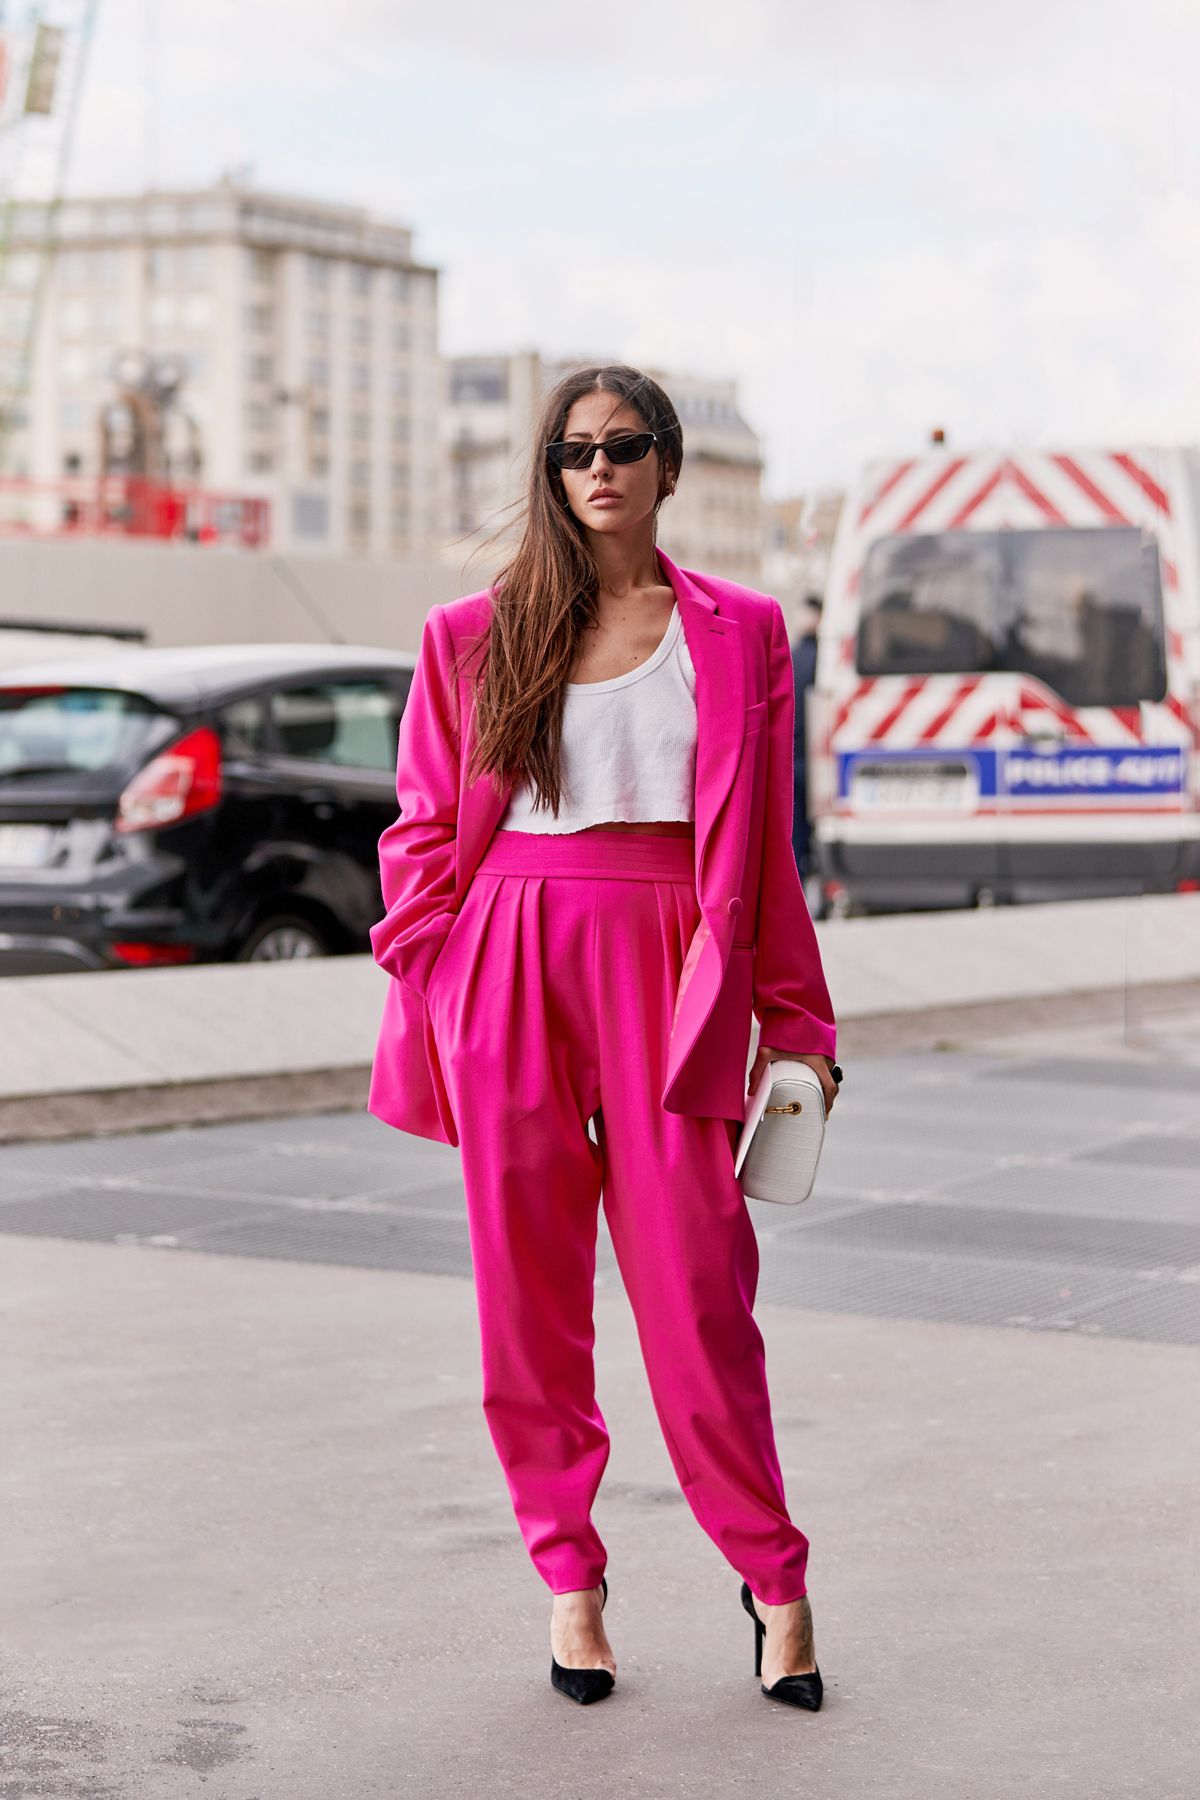 3 Outdated Fashion Color Trends to Ditch in 2019 | Who What Wear